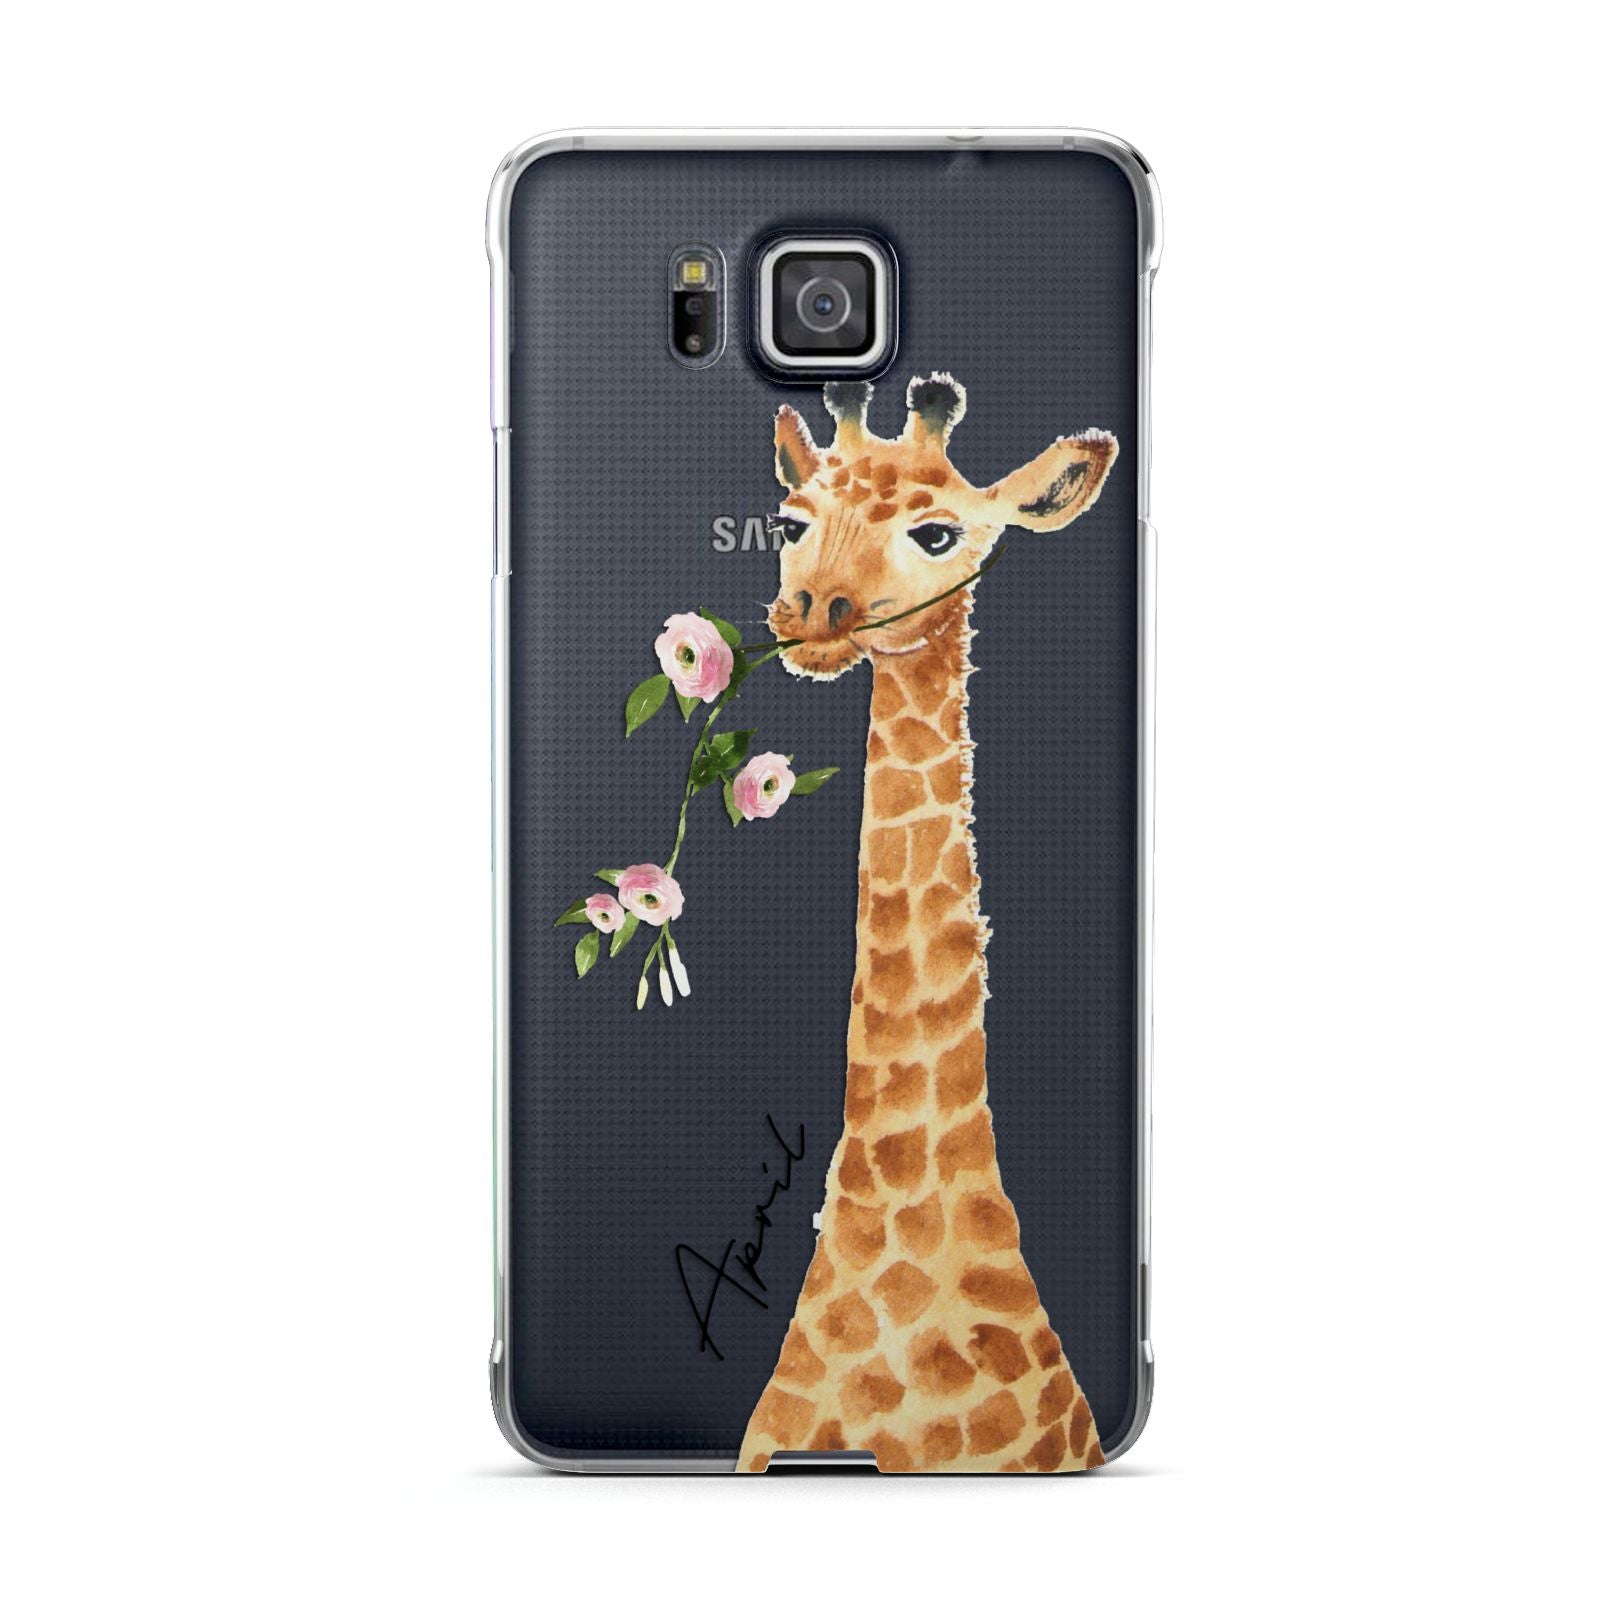 Personalised Giraffe with Name Samsung Galaxy Alpha Case